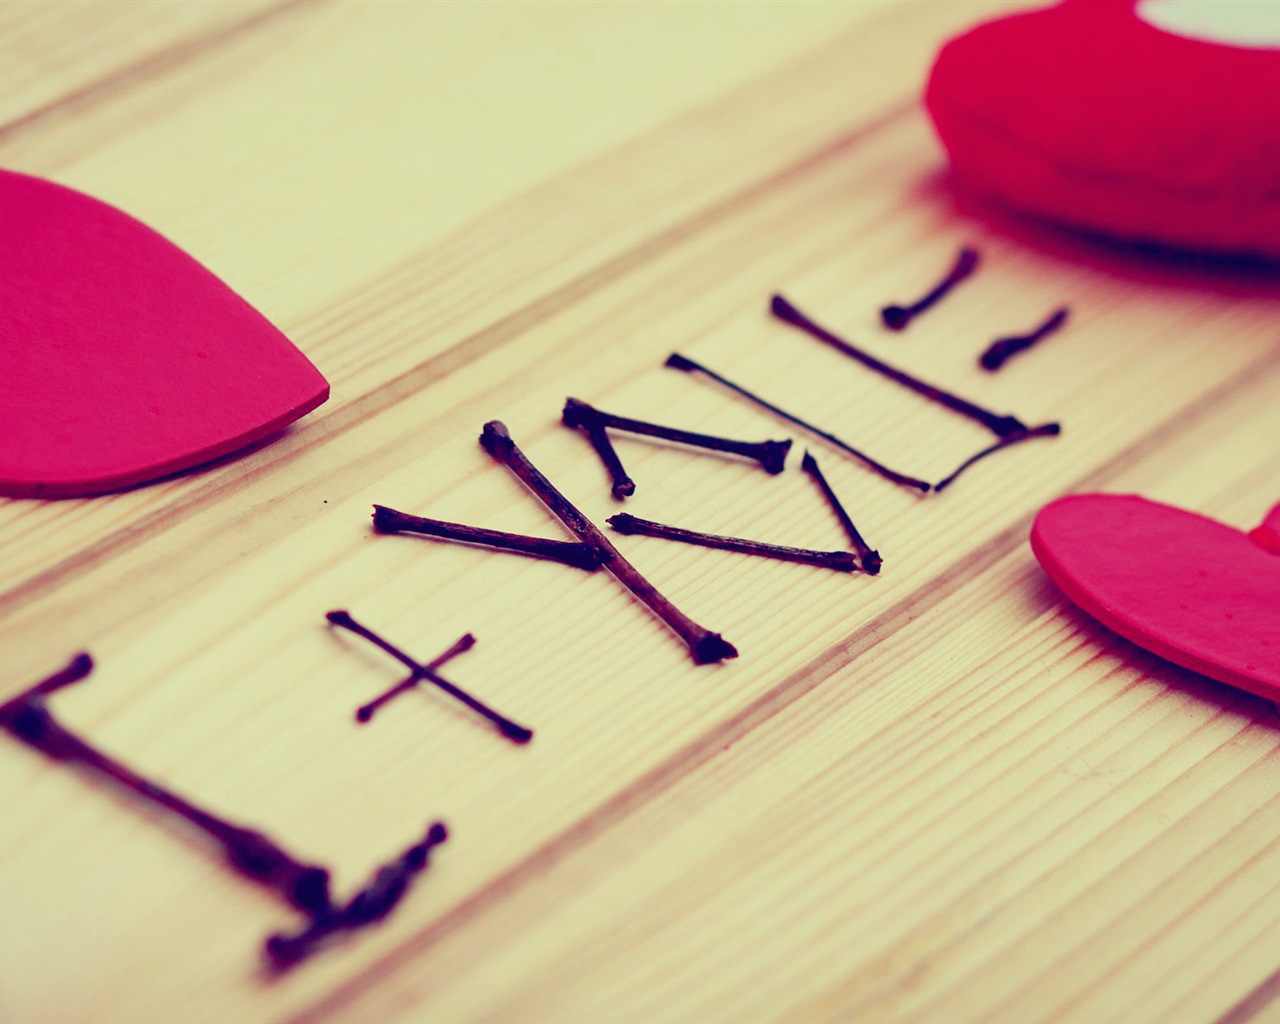 The theme of love, creative heart-shaped HD wallpapers #4 - 1280x1024